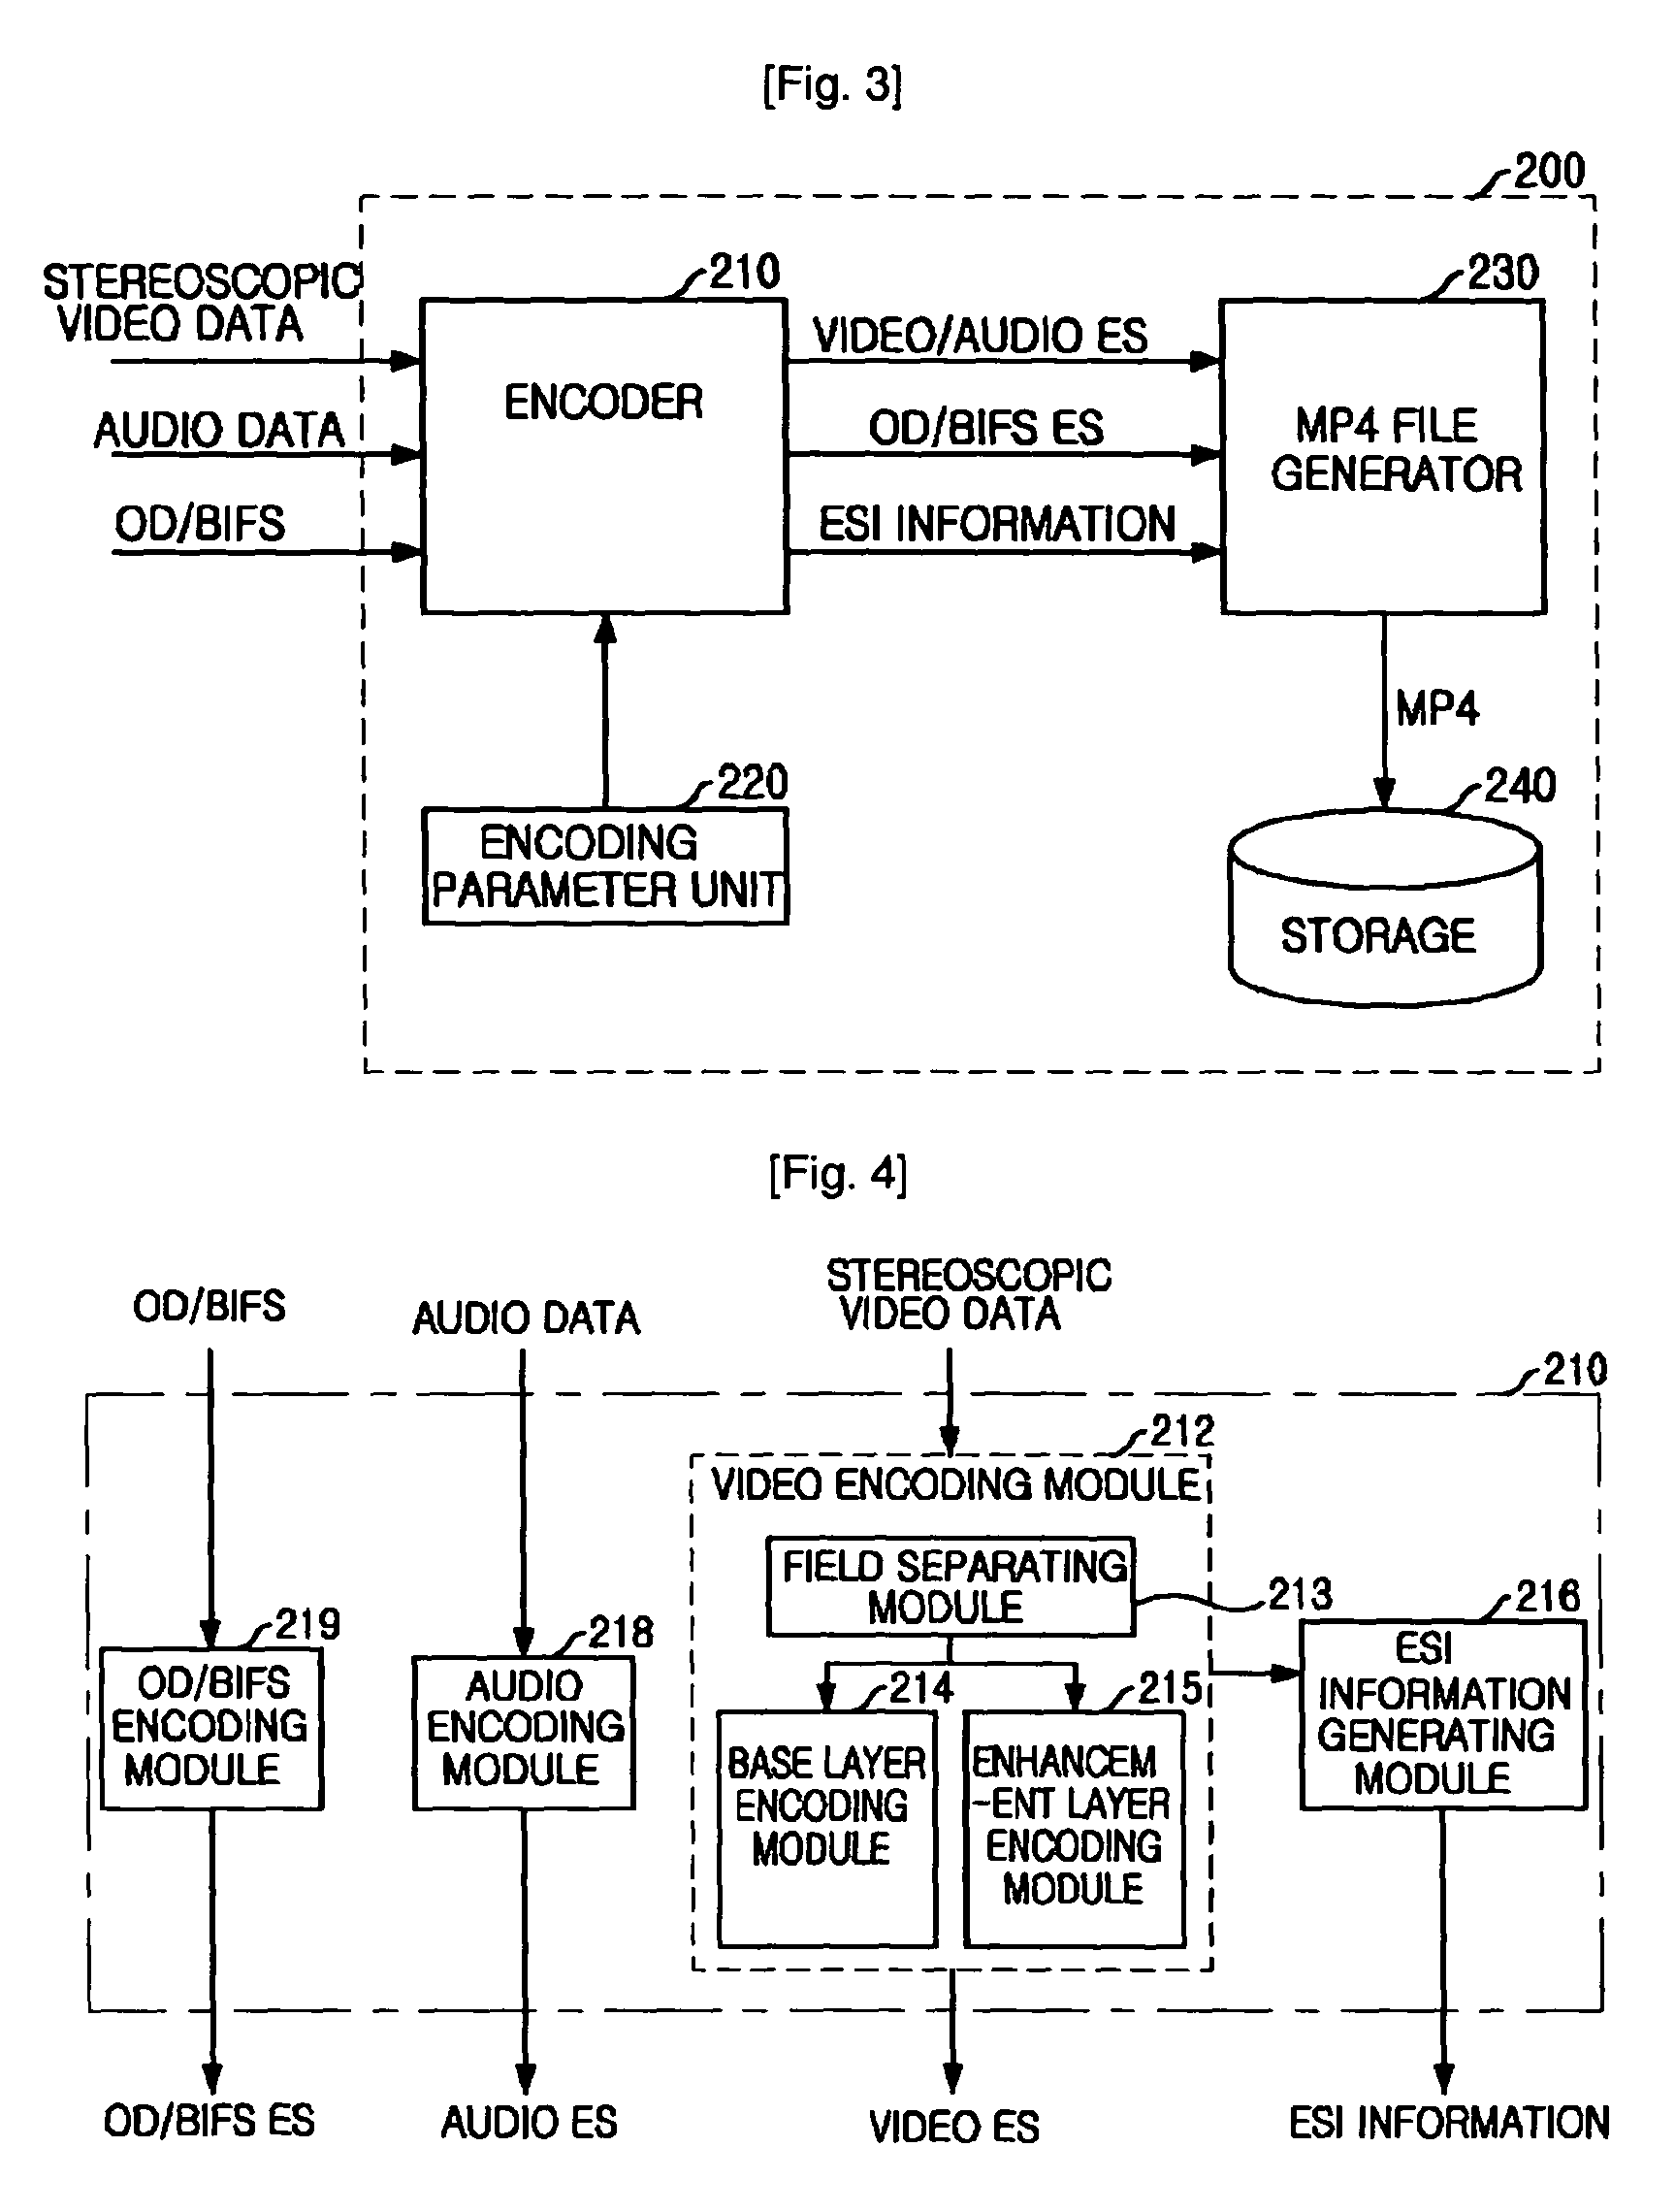 System and method for internet broadcasting of MPEG-4-based stereoscopic video